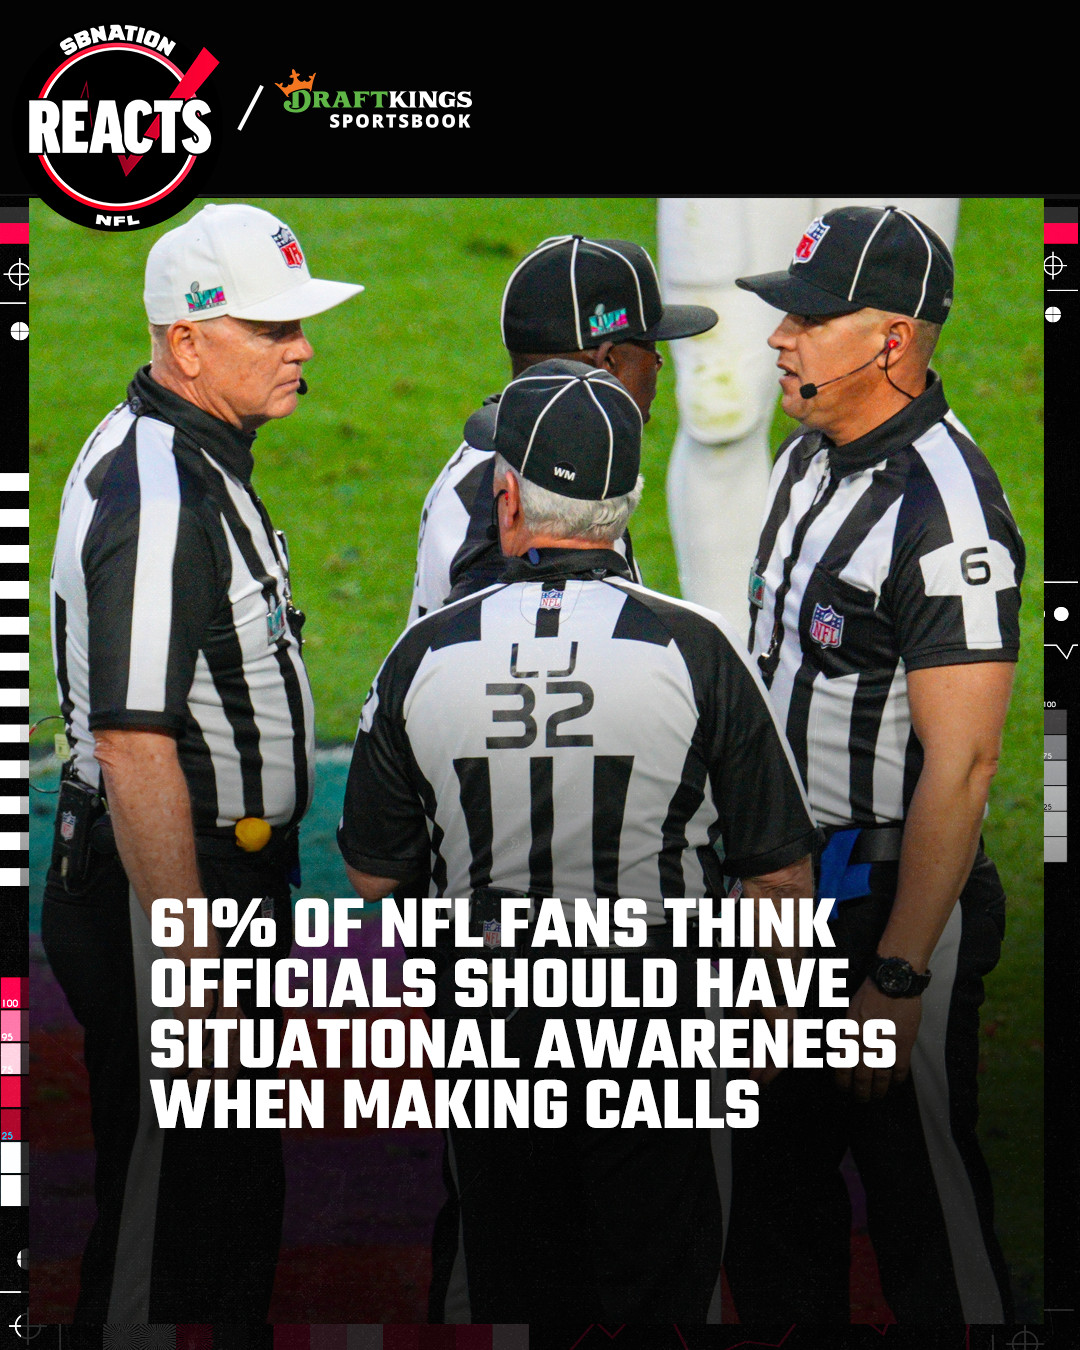 SBN reacts: NFL fans don’t want the same flag on the 4 as they do on the 1

End-shutdown